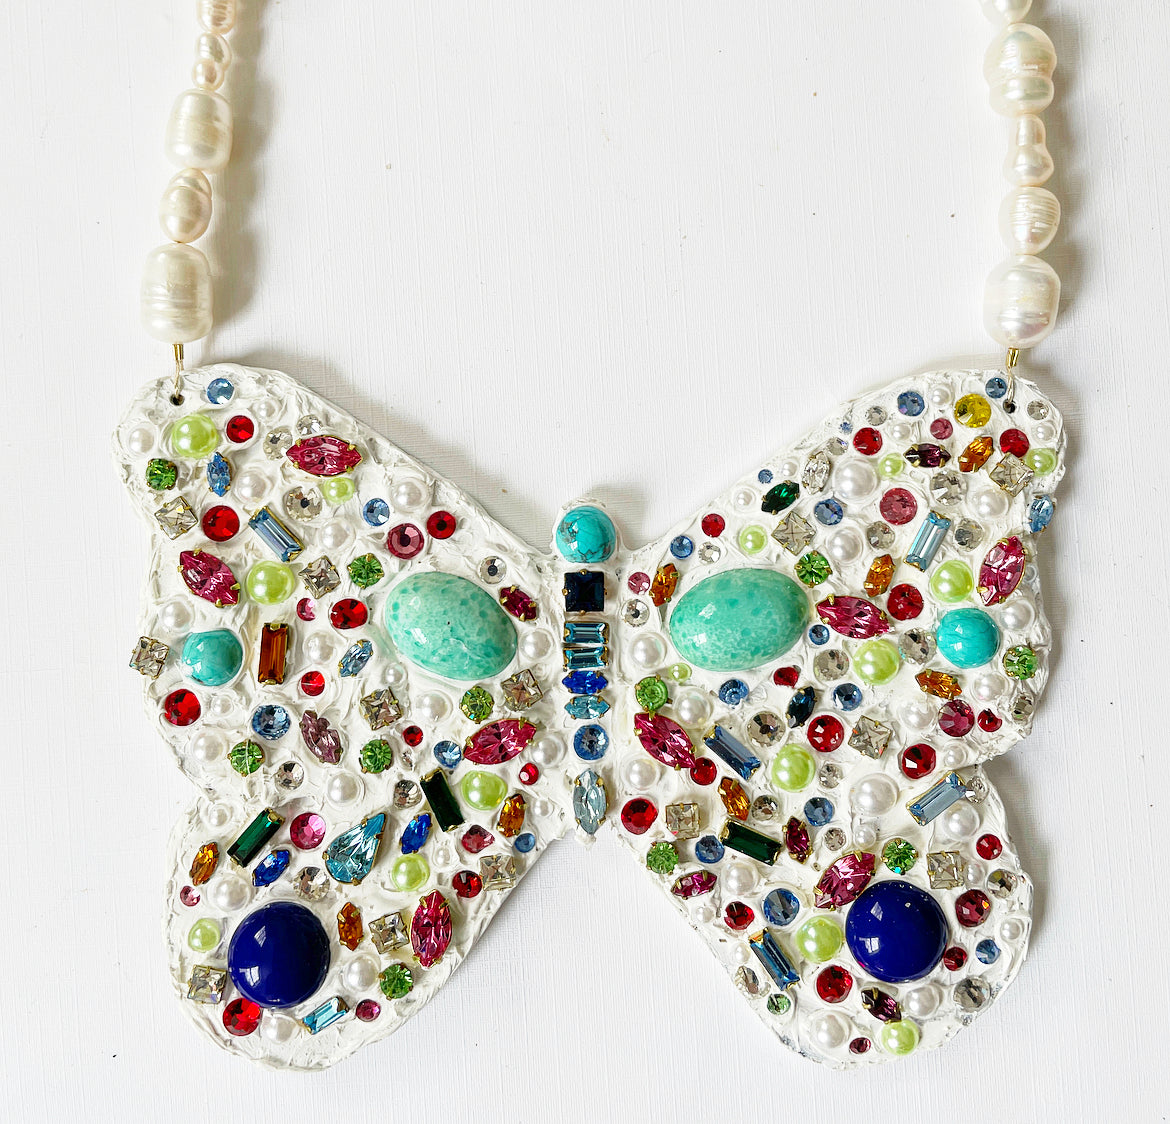 Treasure chest butterfly necklace